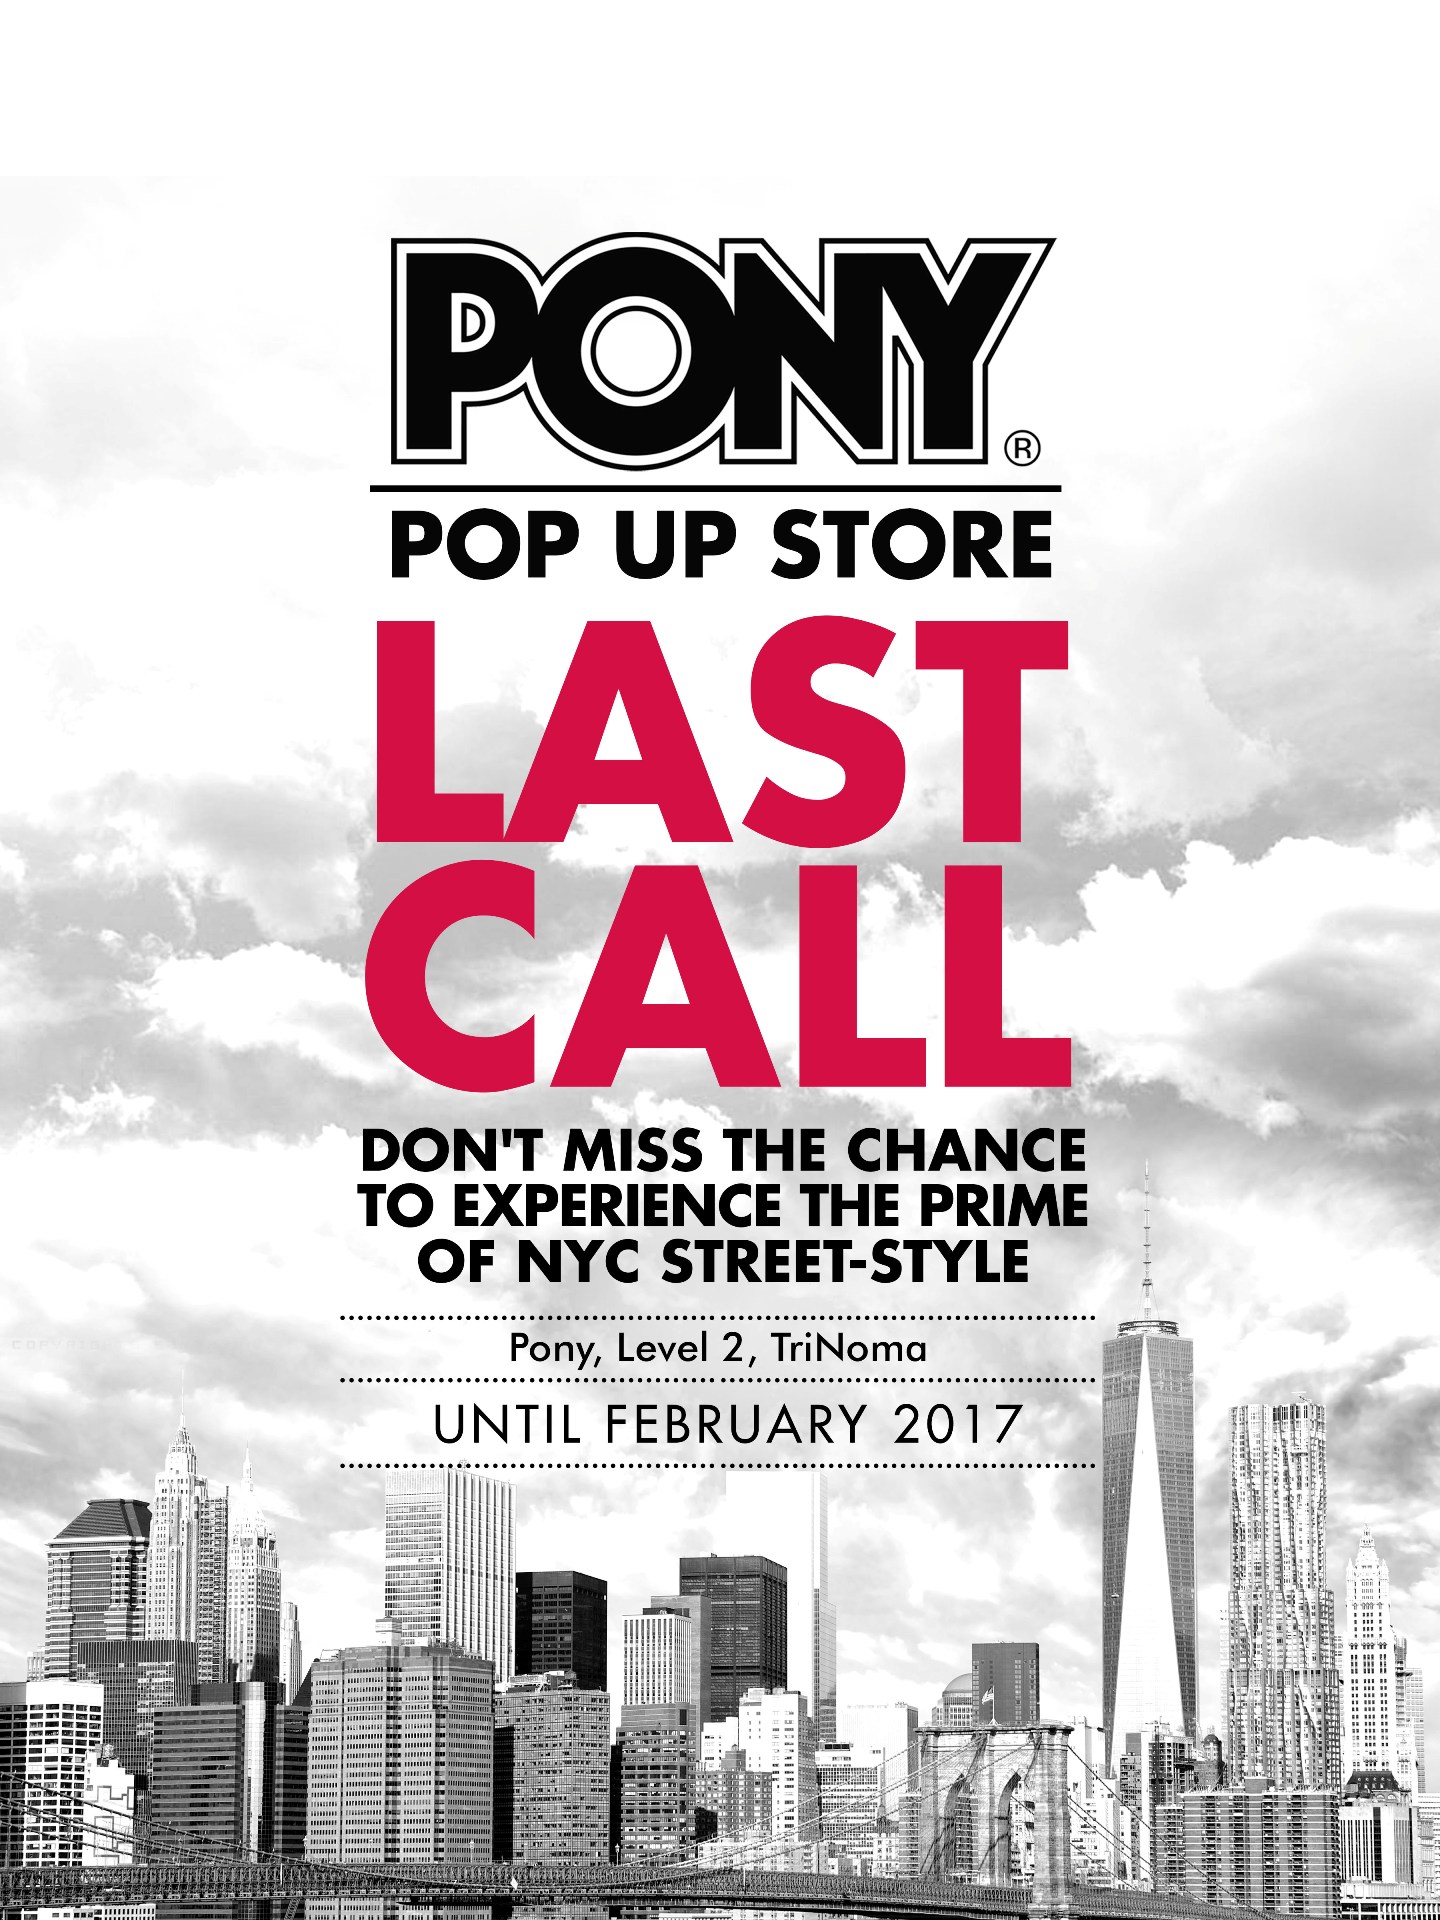 Last Call to PONY Pop-Up Store